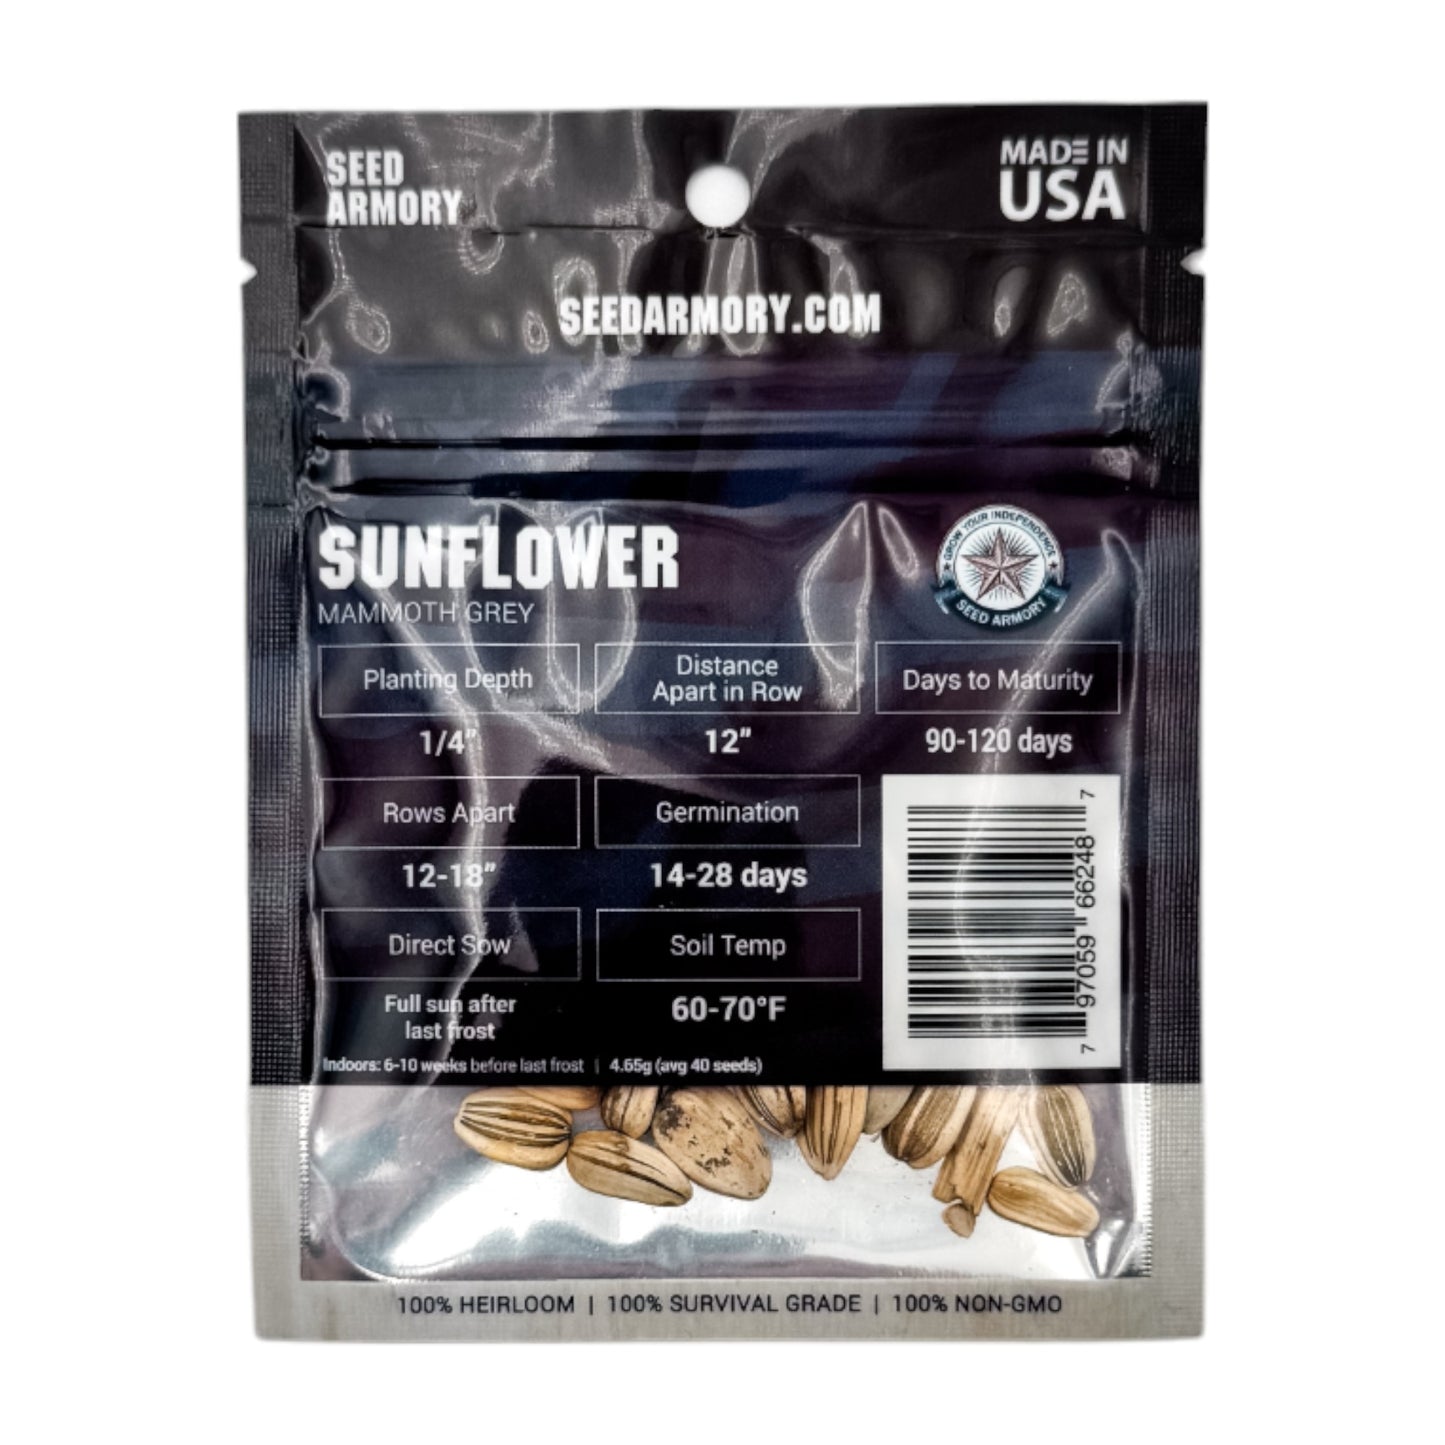 Reverse packet of Mammoth Grey sunflower heirloom seeds with planting instructions